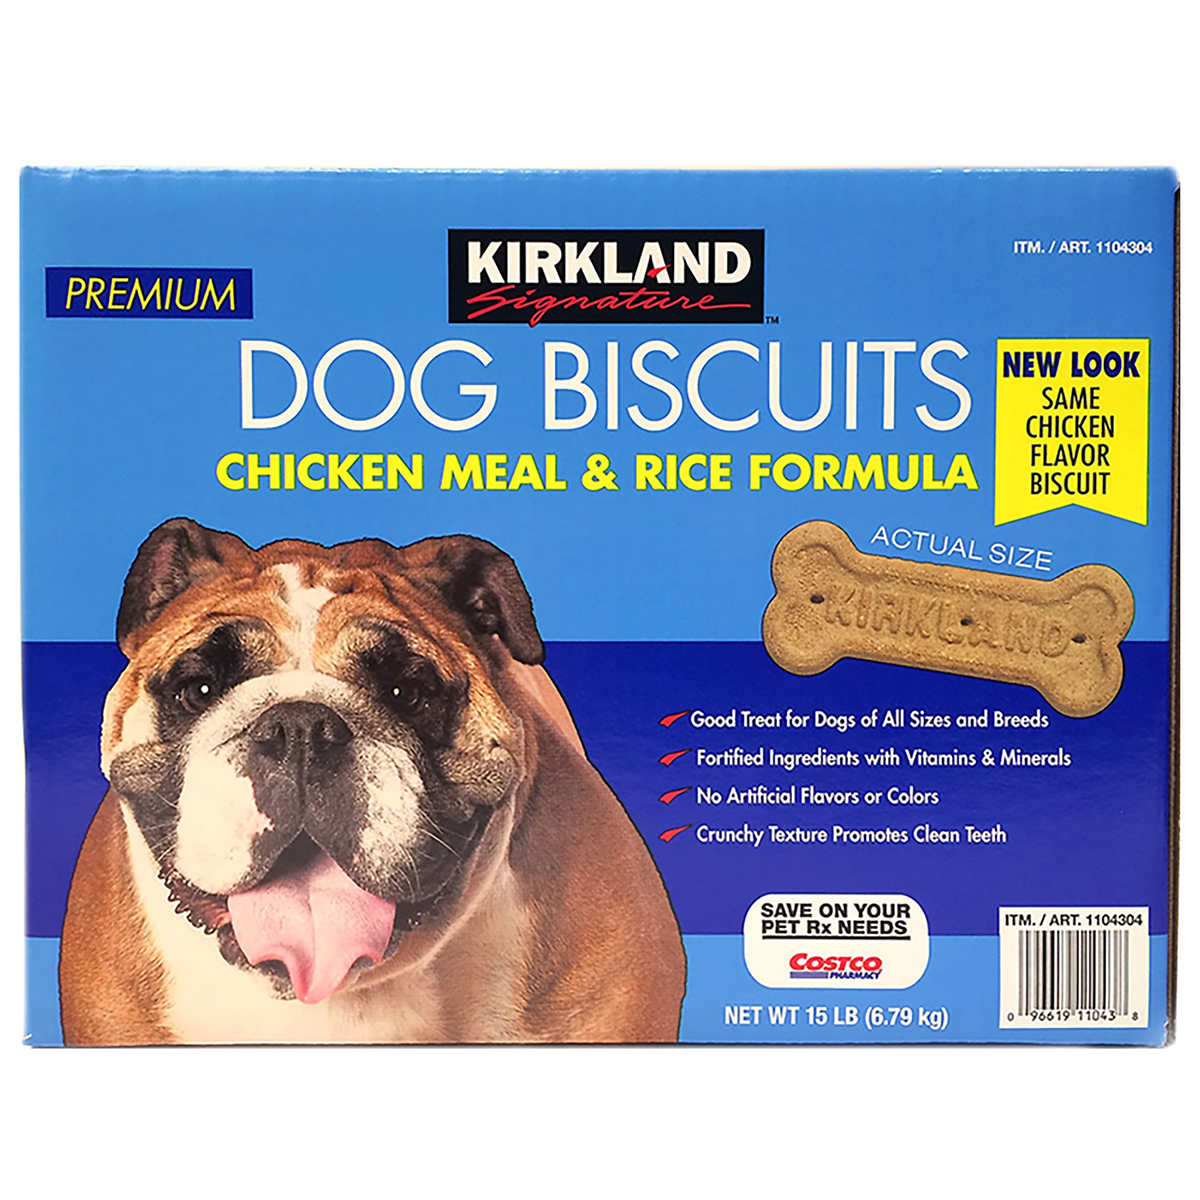 Kirkland Signature Chicken Meal & Rice Formula Dog Biscuits, 15 Lbs